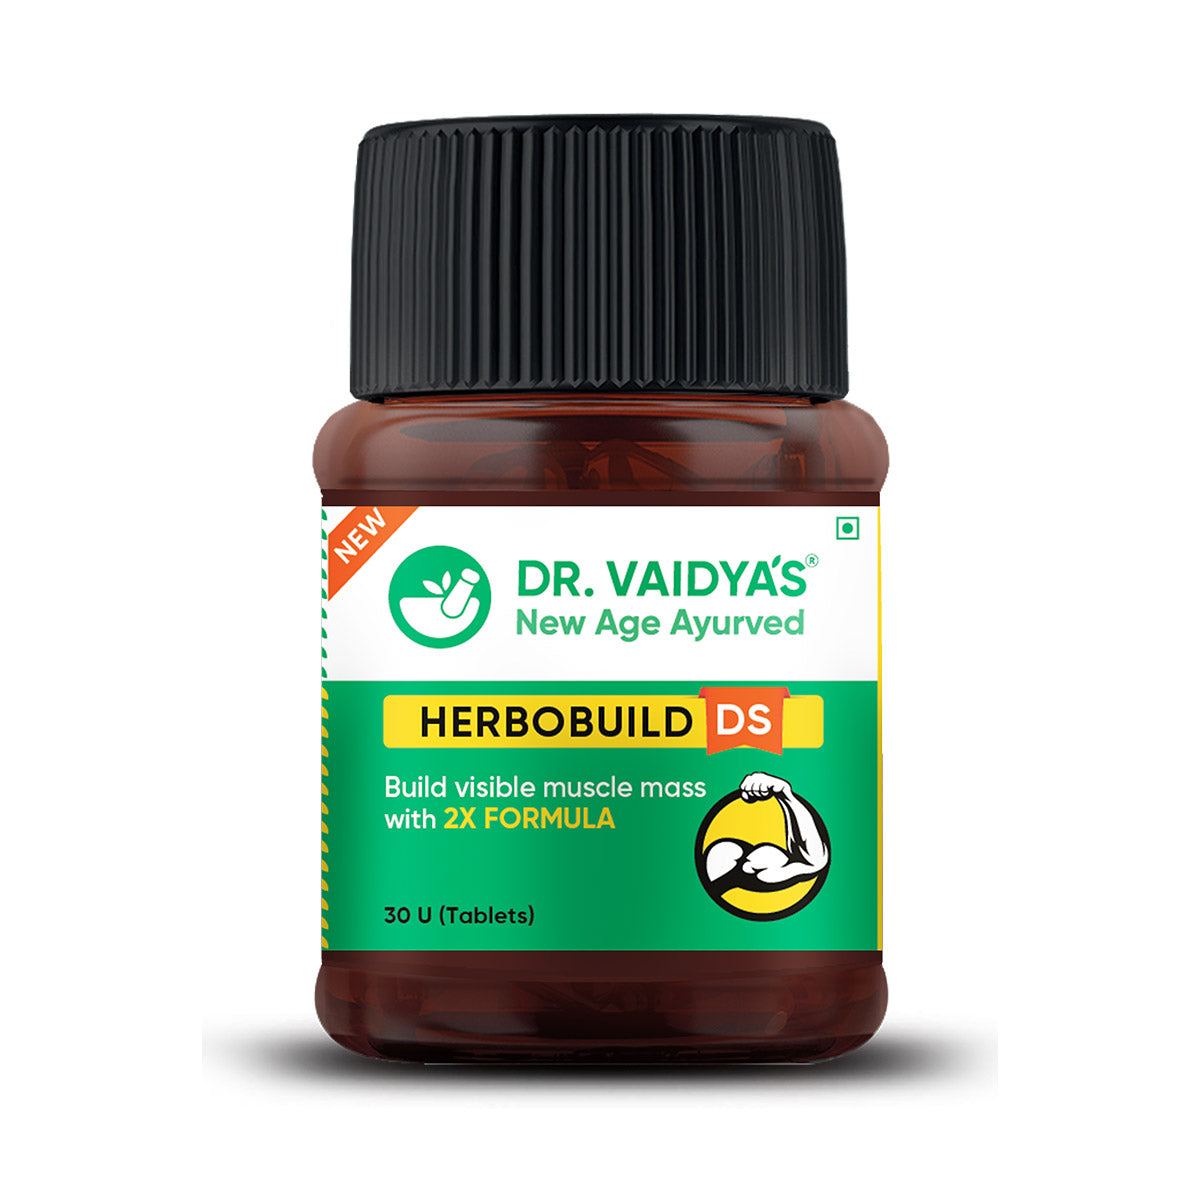 Herbobuild DS (Double Strength): Natural Muscle Gainer With 2x Ayurvedic Herbs